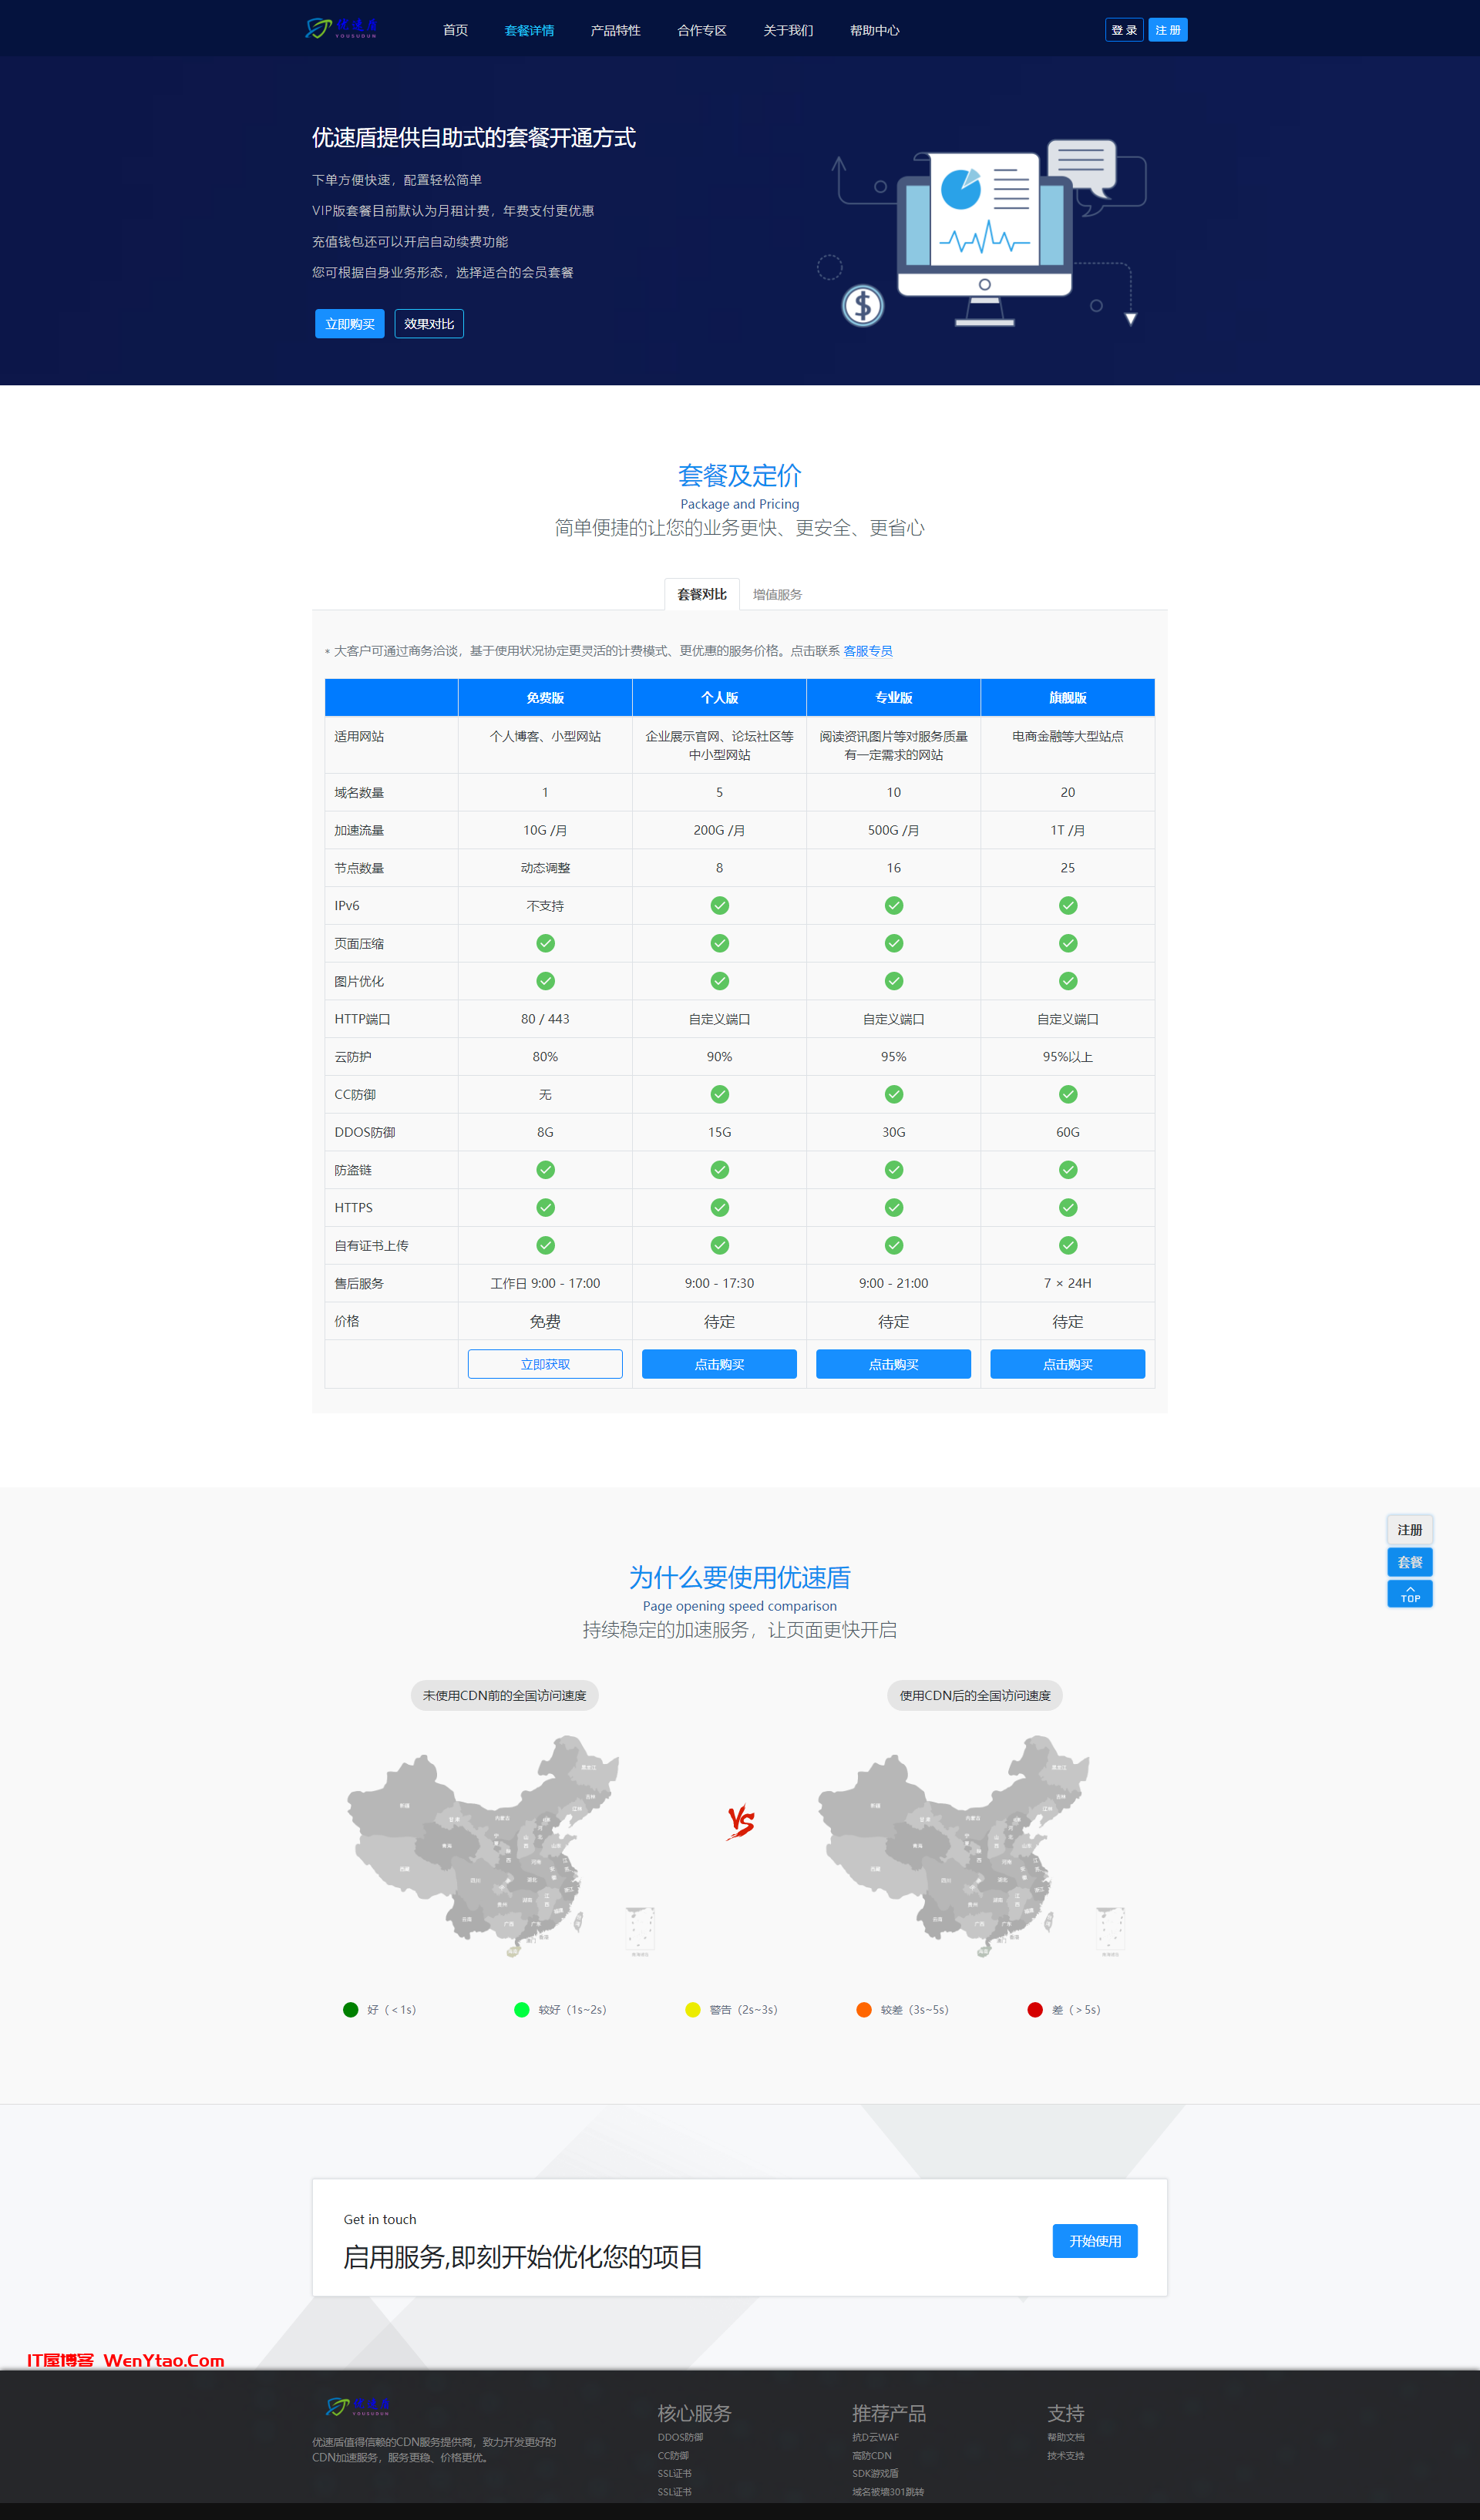  Yousudun CDN official website template CDN official website template CDNFLY official website template with package details page effect comparison before and after using CDN dynamic page networknbsp template CDN address official website page 2